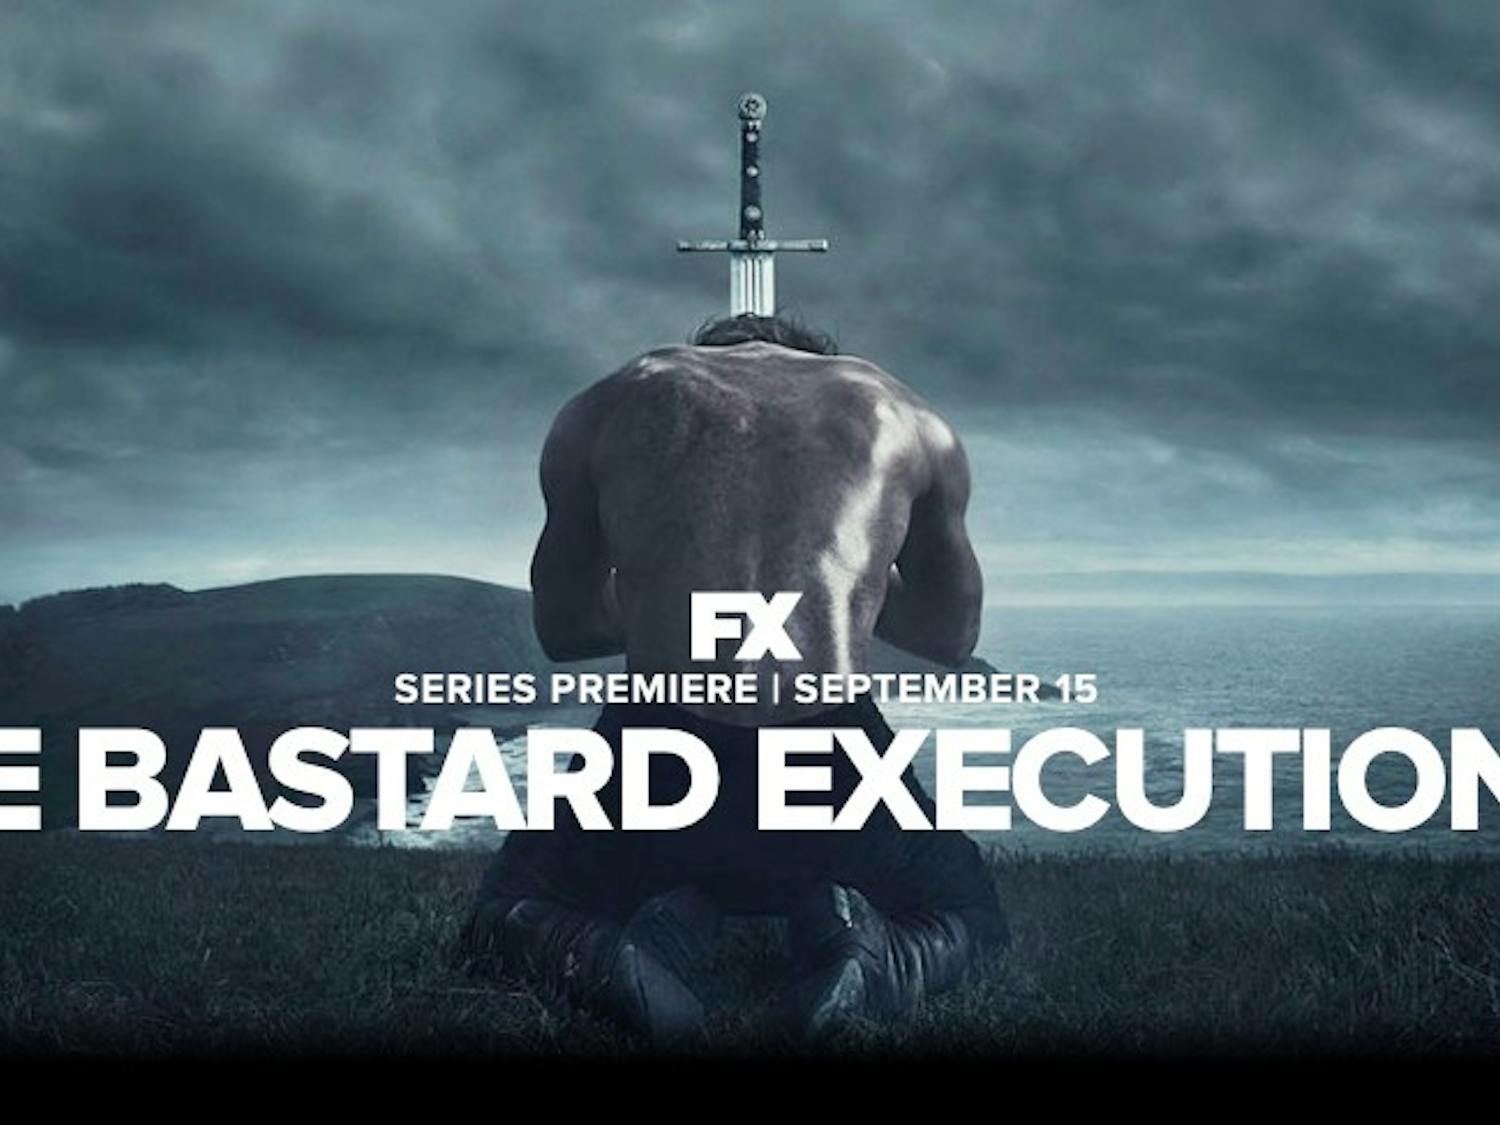 The Bastard Executioner is a new show airing on FX Sept.15 starring a peace-seeking knight (Lee Jones) thrown back into a violent world he so desperately wanted to escape from.